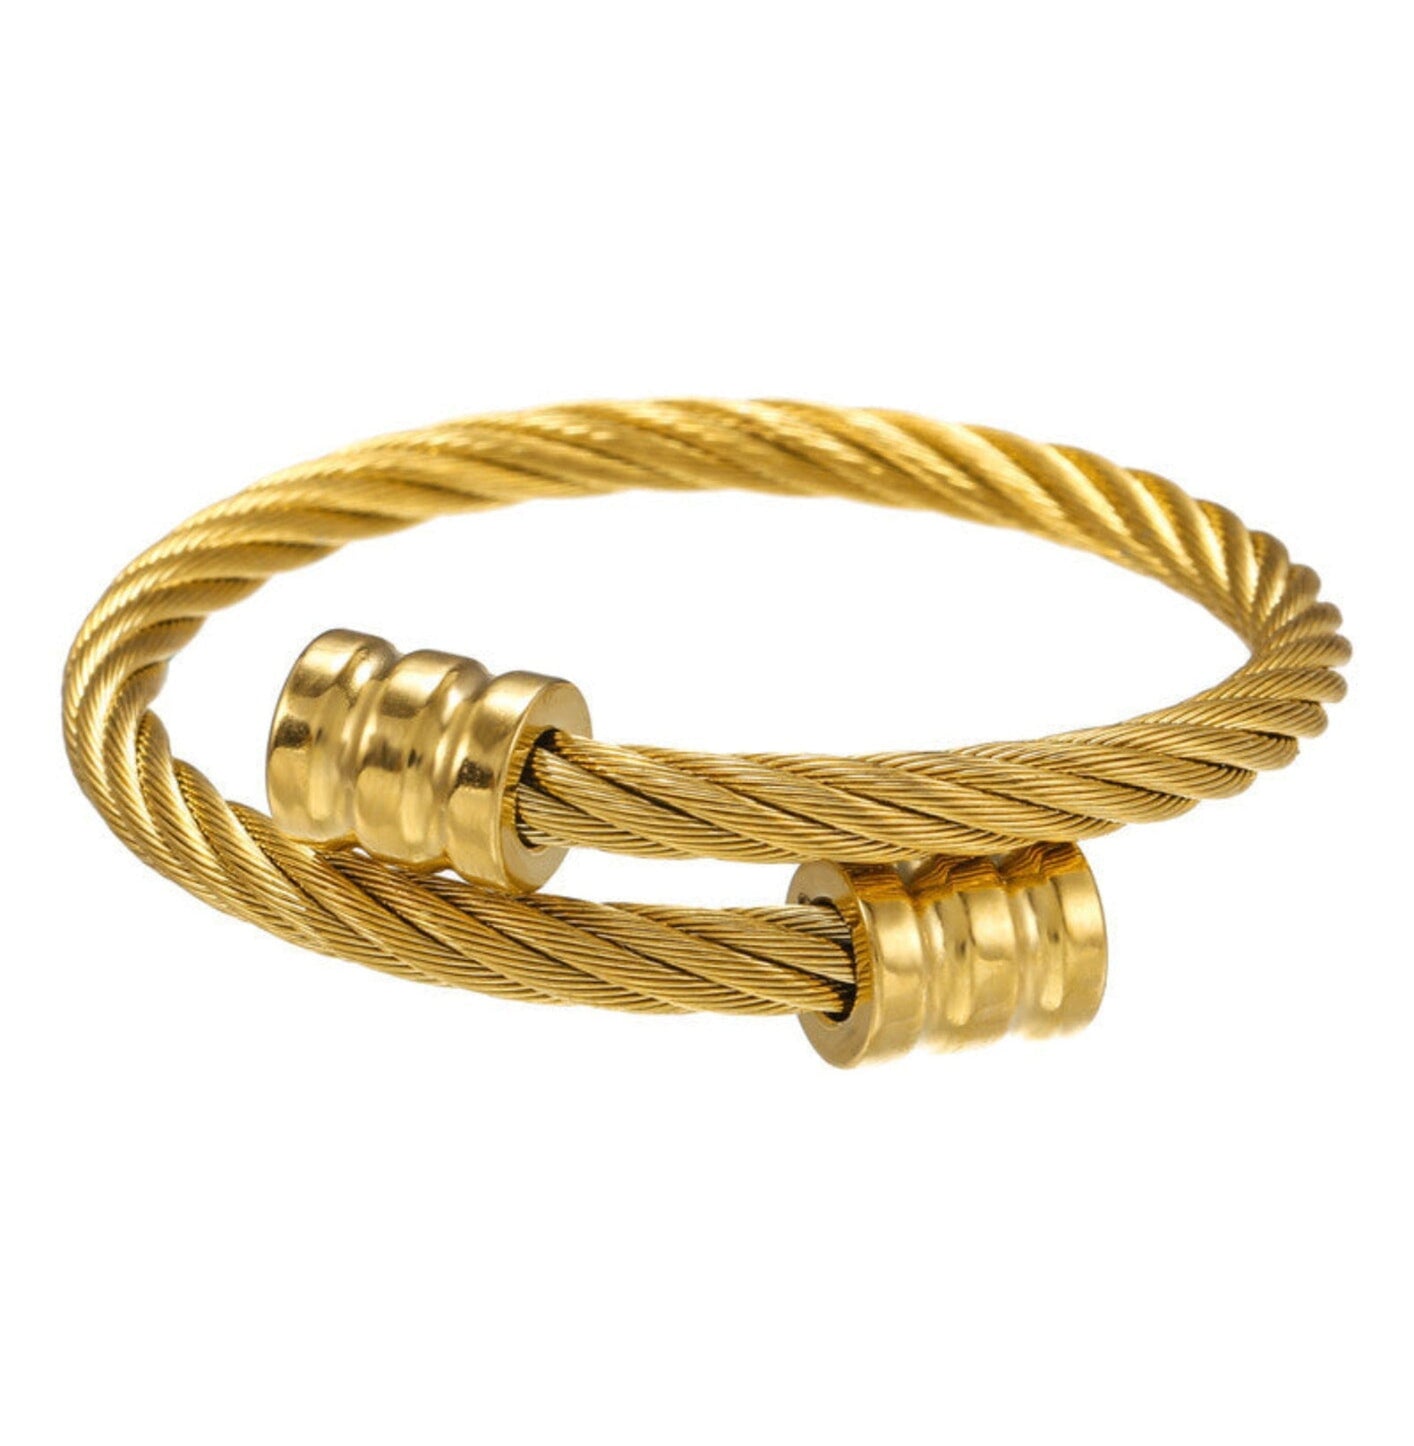 TWISTER BANGLE BRACELET - GOLD ring Yubama Jewelry Online Store - The Elegant Designs of Gold and Silver ! Gold 